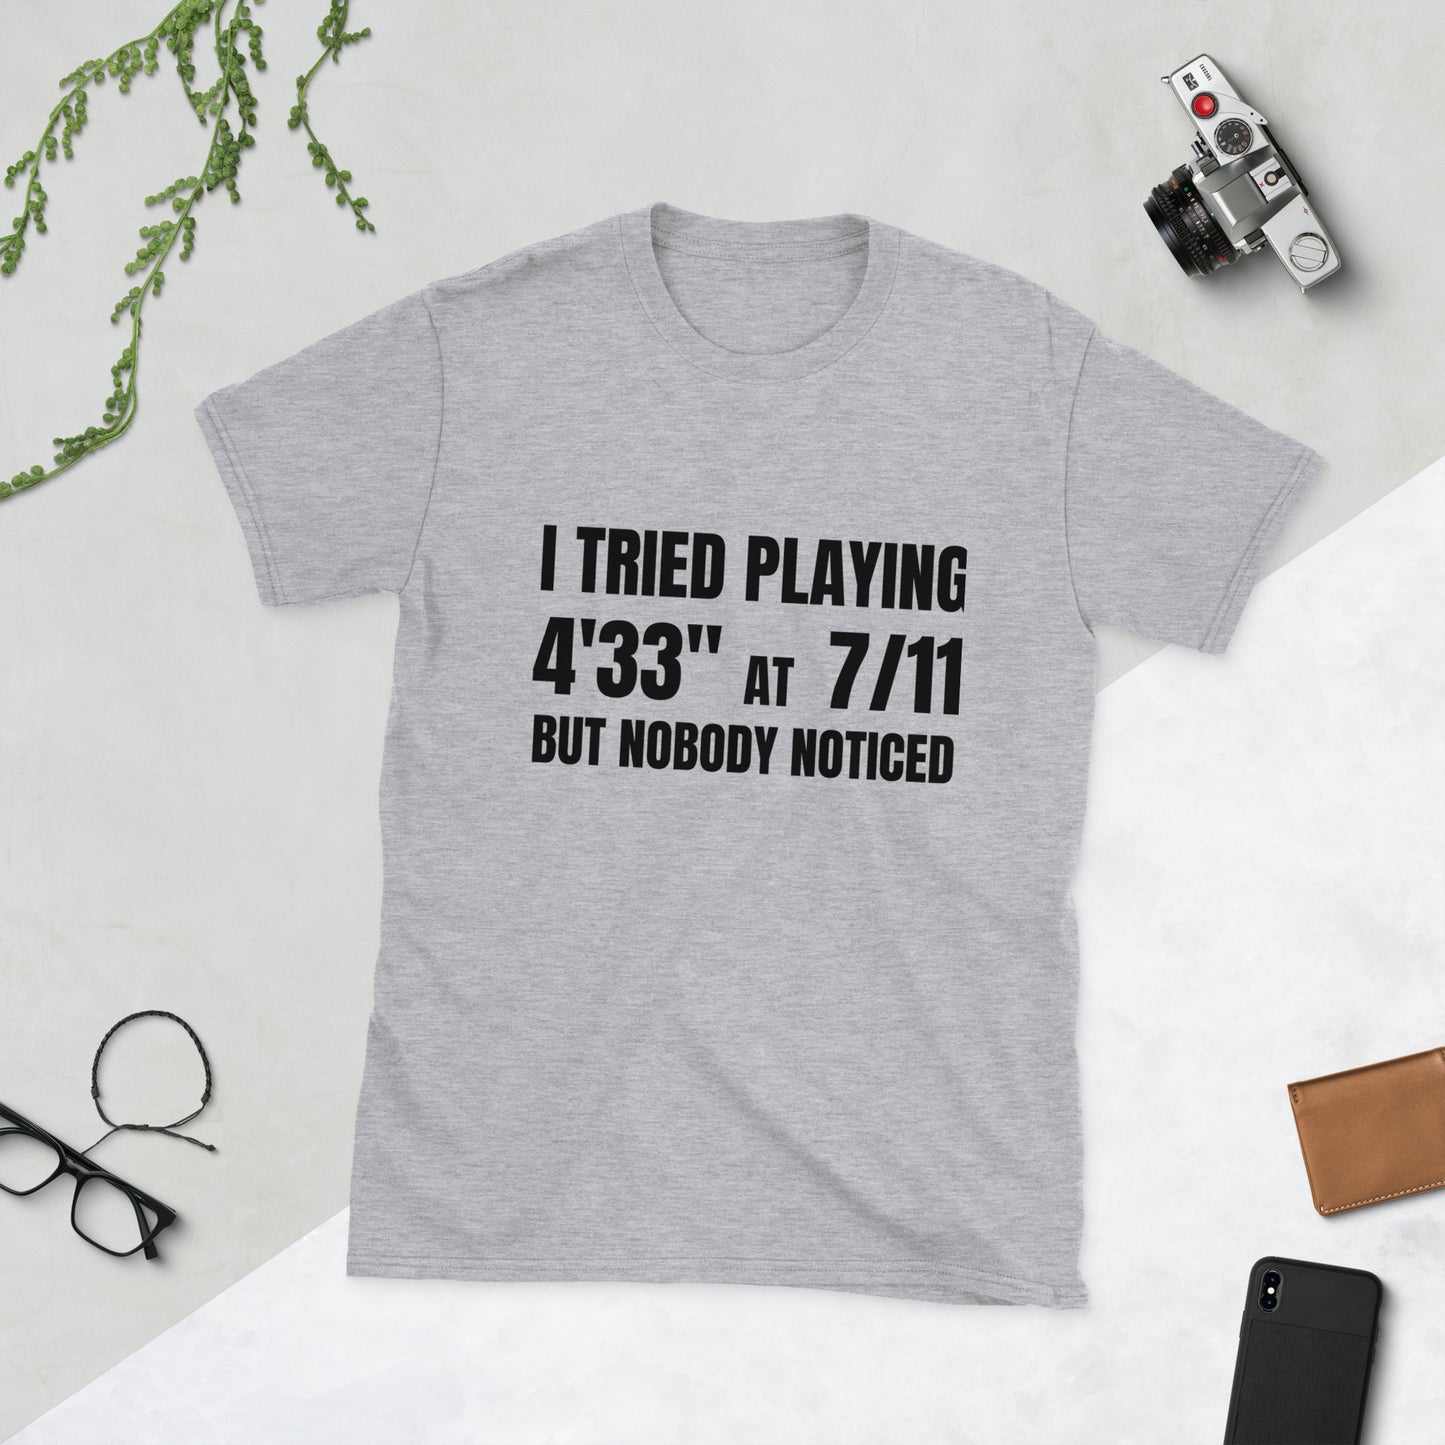 I tried playing '4'33'' at 7/11, but nobody noticed. Unisex T-Shirt